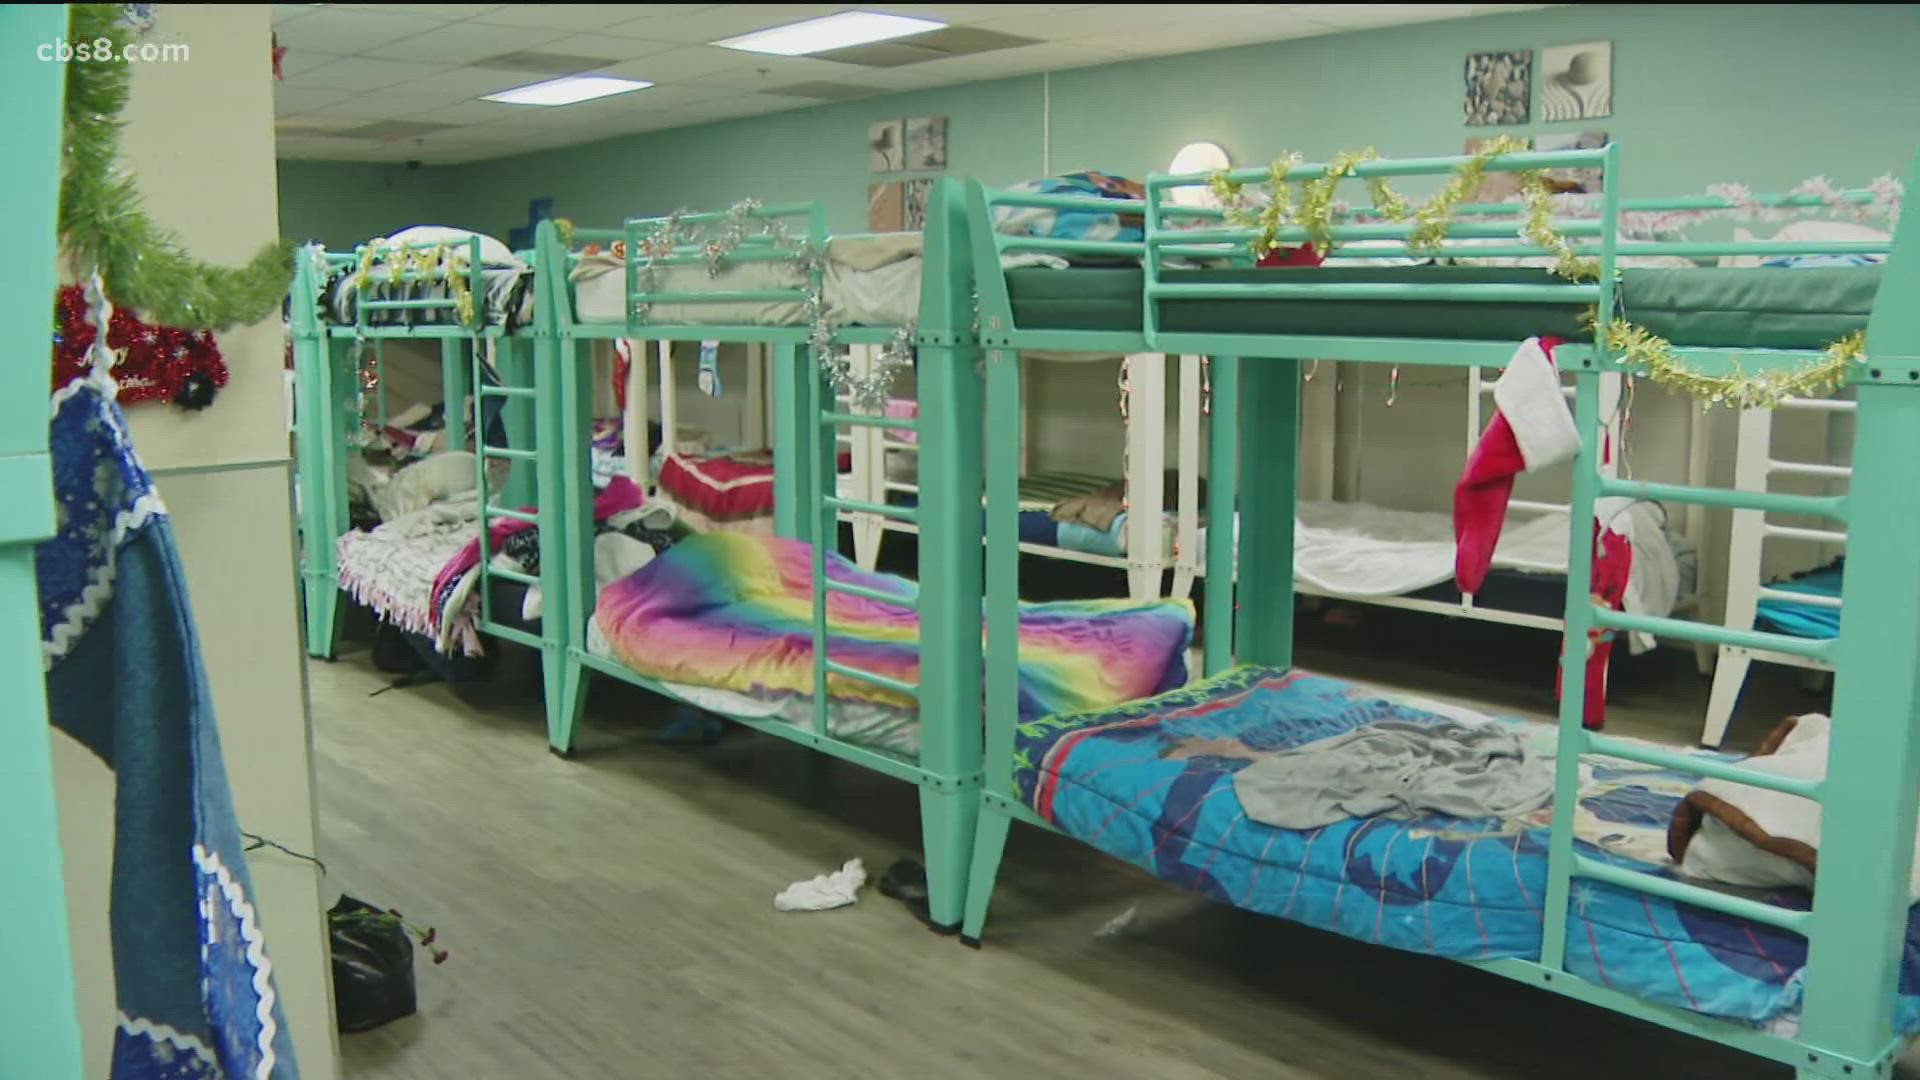 News 8 found a line of several dozen women and children outside the San Diego Rescue Mission shelter Thursday evening.